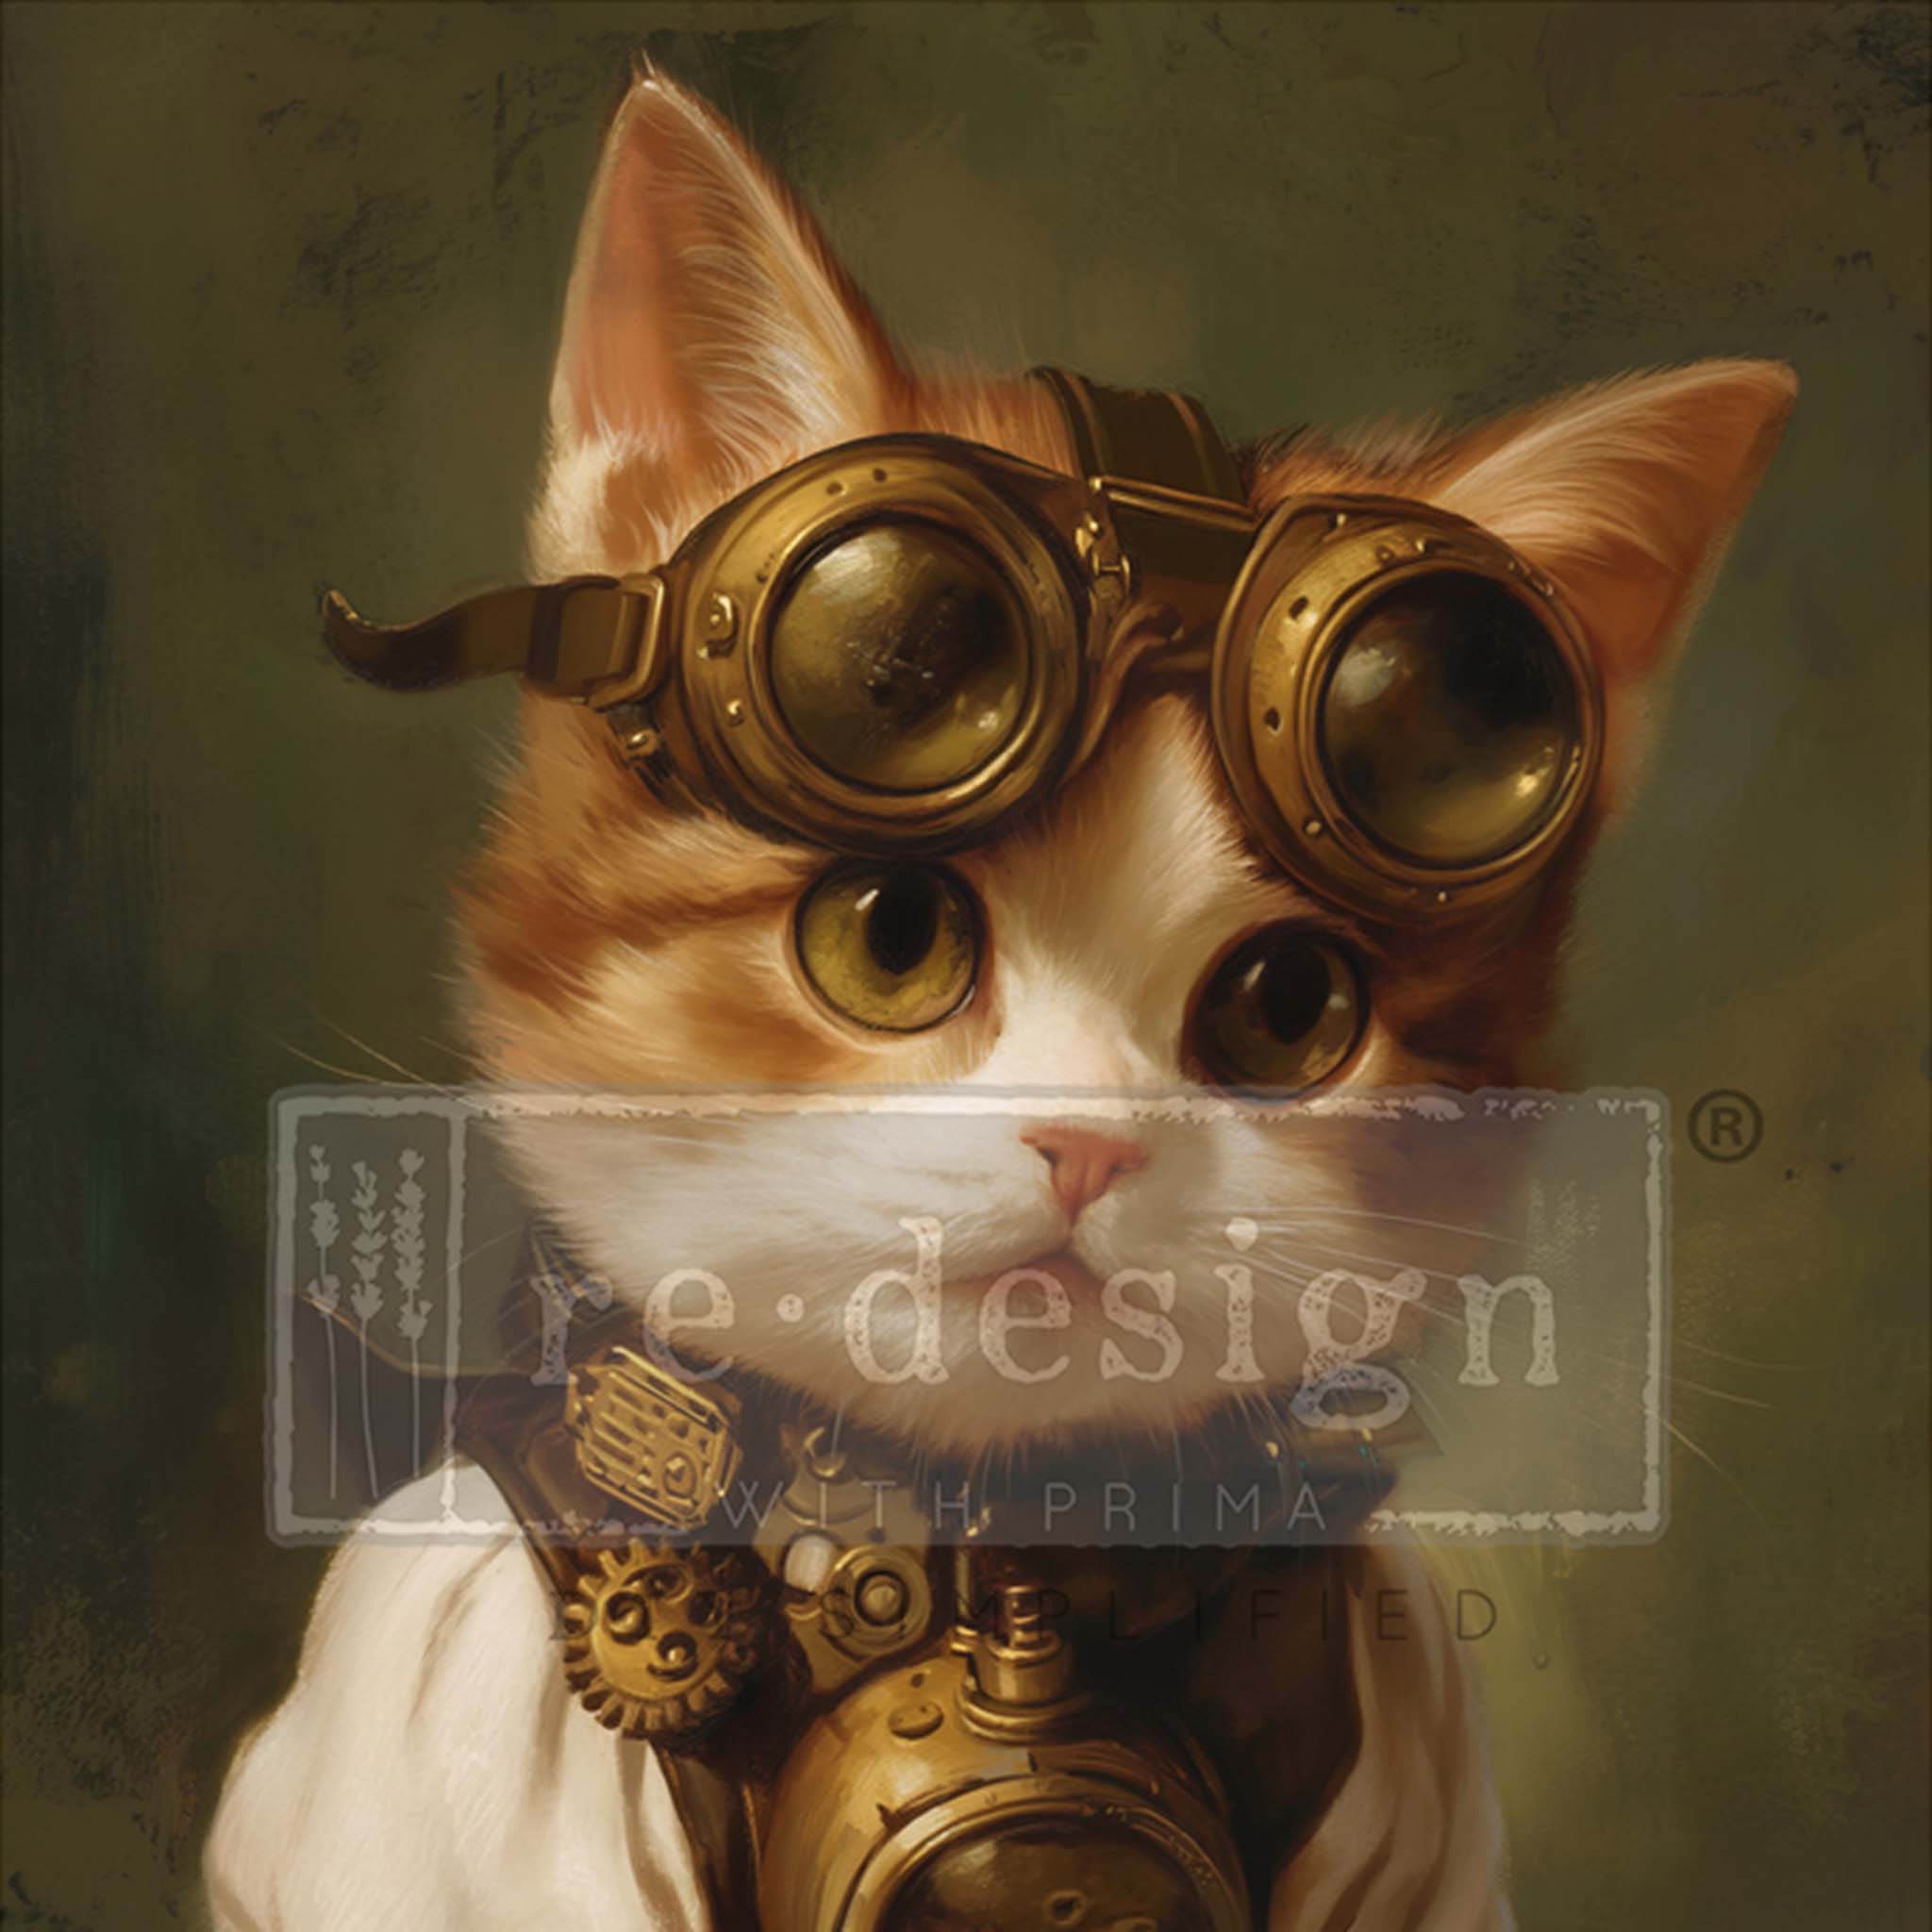 Close-up of an A1 fiber paper featuring a steampunk-inspired design of an adorable orange and white kitten sporting pilot's goggles and clothing.